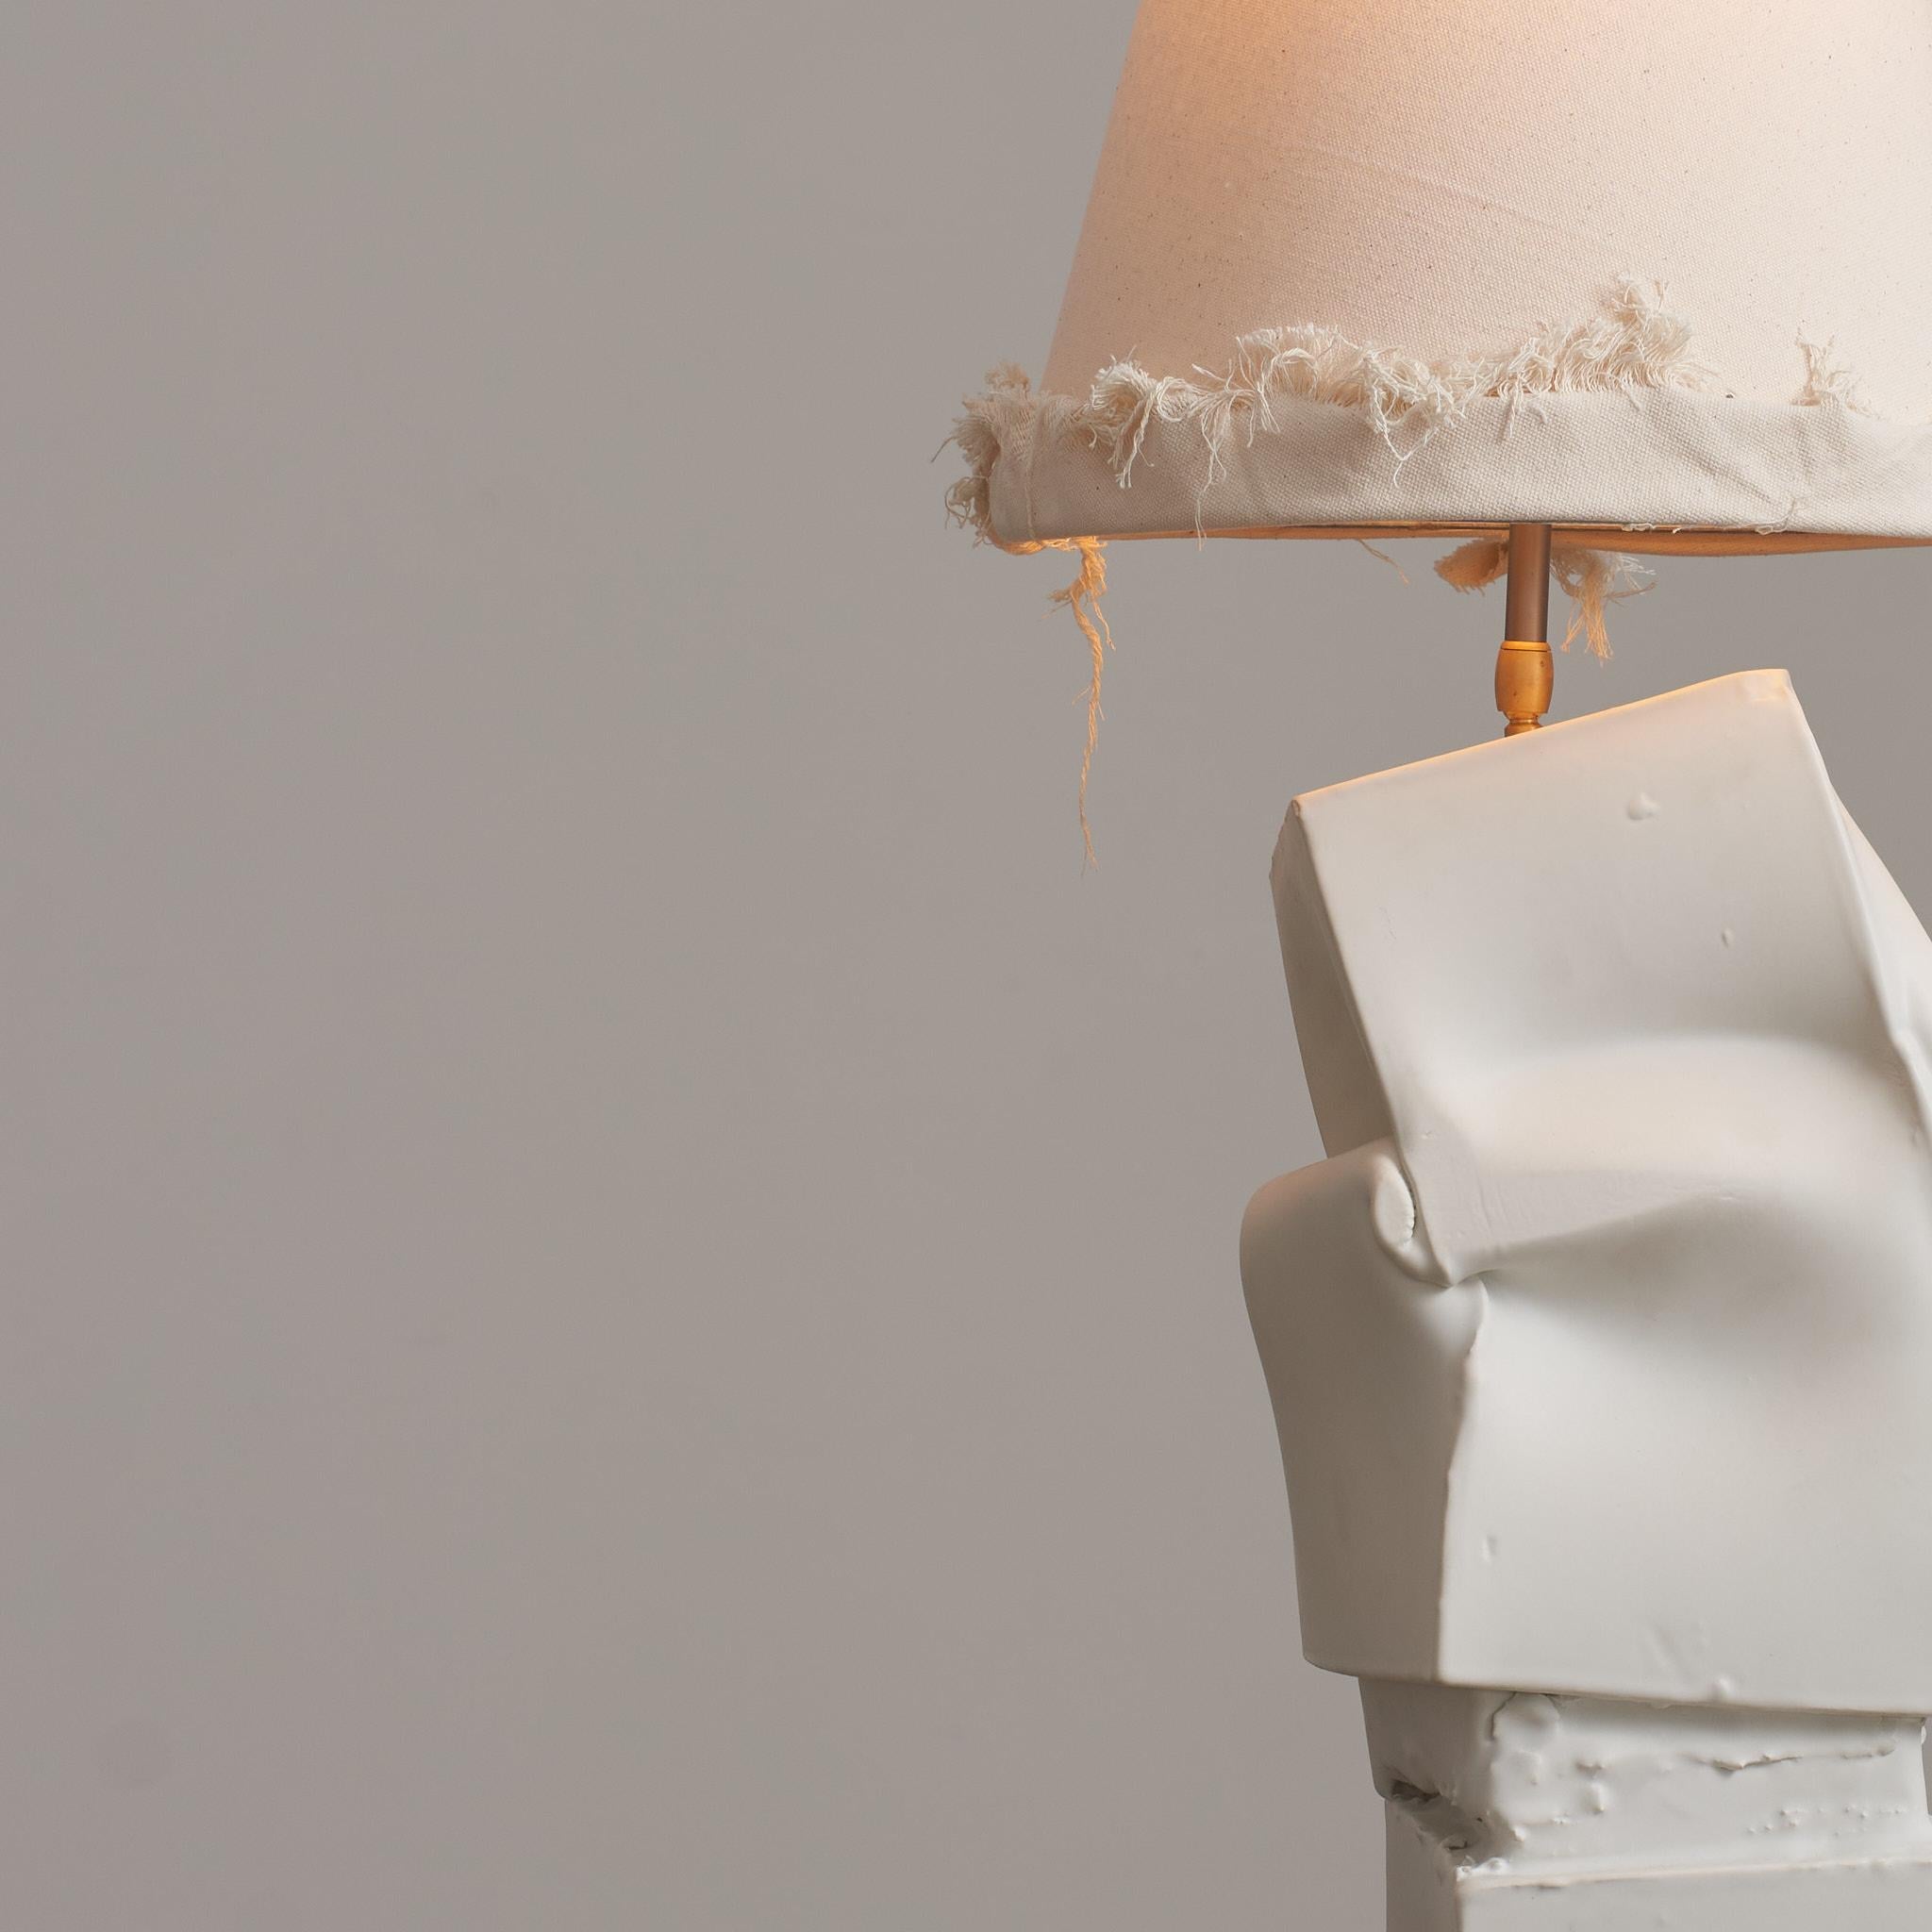 The Brenta+Brenta lamp is part of a project entitled Break the Mold by artist Jenna Basso Pietrobon. Each lamp is unique and the lampshade direction is adjustable. The lamp is created by using a few different molds and the shapes are manipulated by